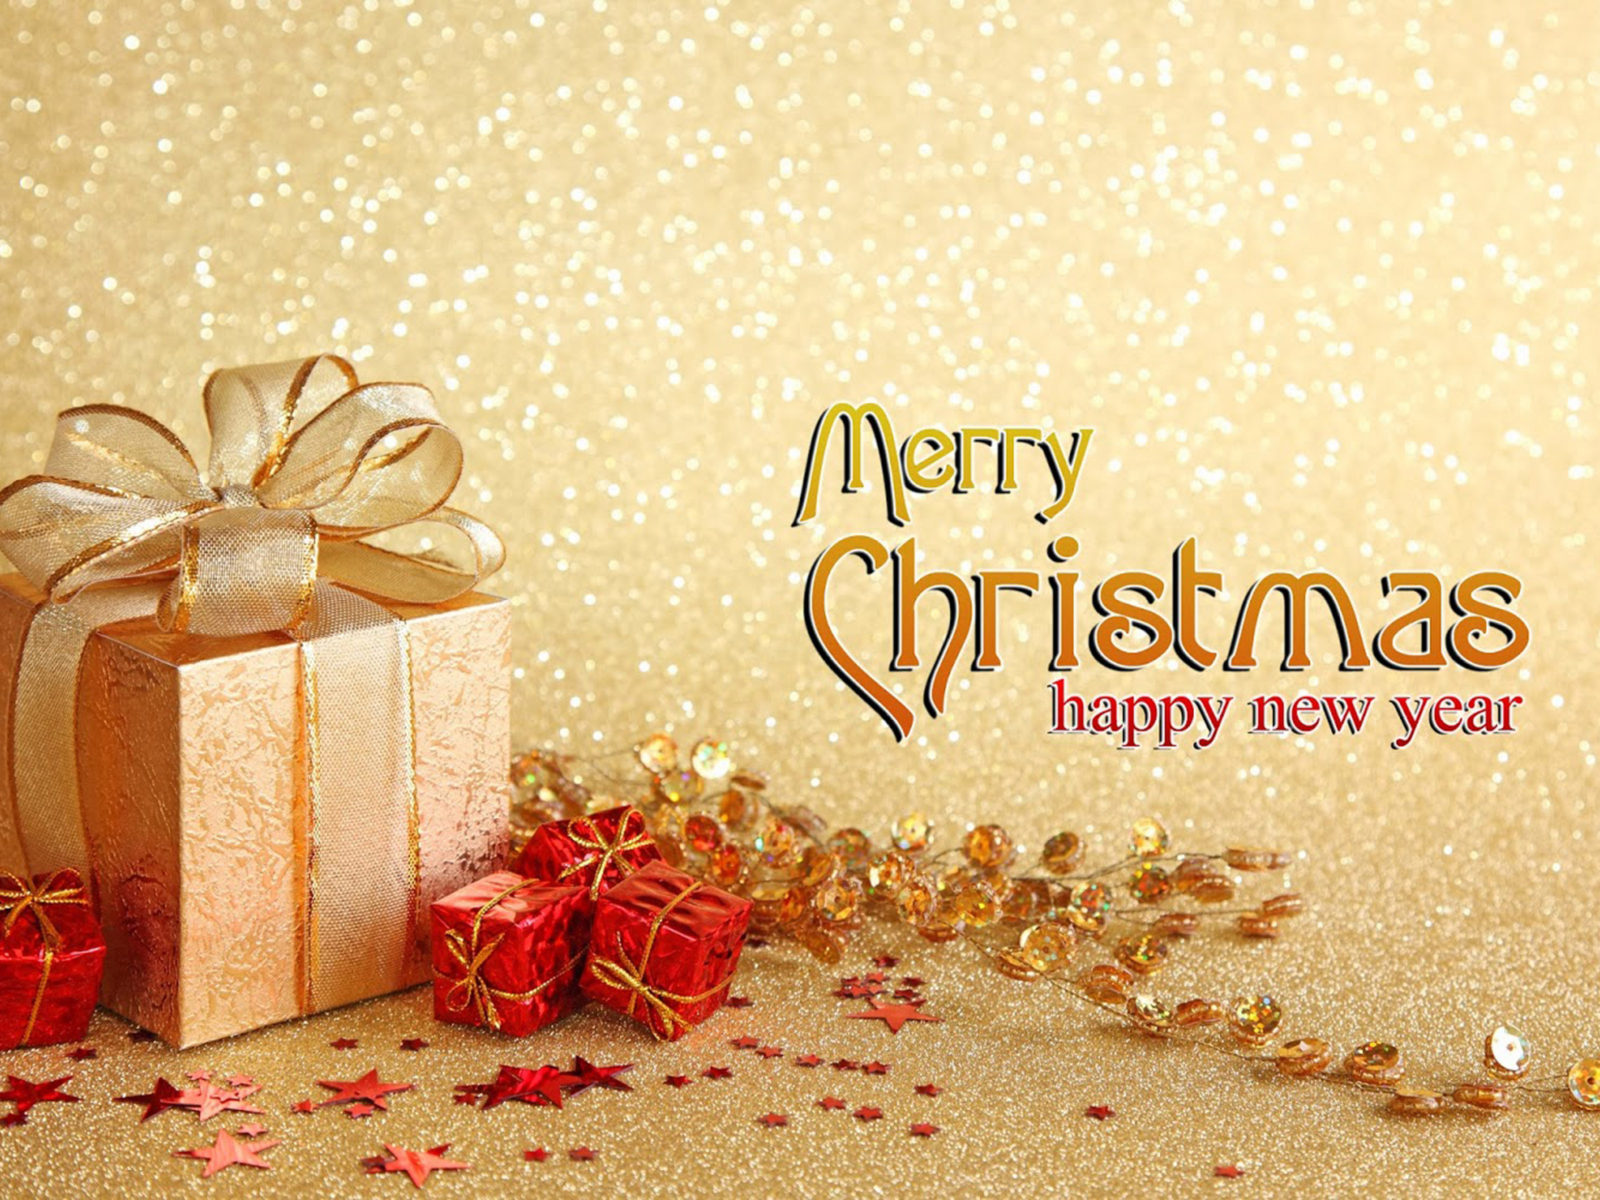 Merry Christmas And New Year Christmas Greeting Cards HD Desktop Wallpaper For Computers Laptop Tablet And Mobile Phones, Wallpaper13.com